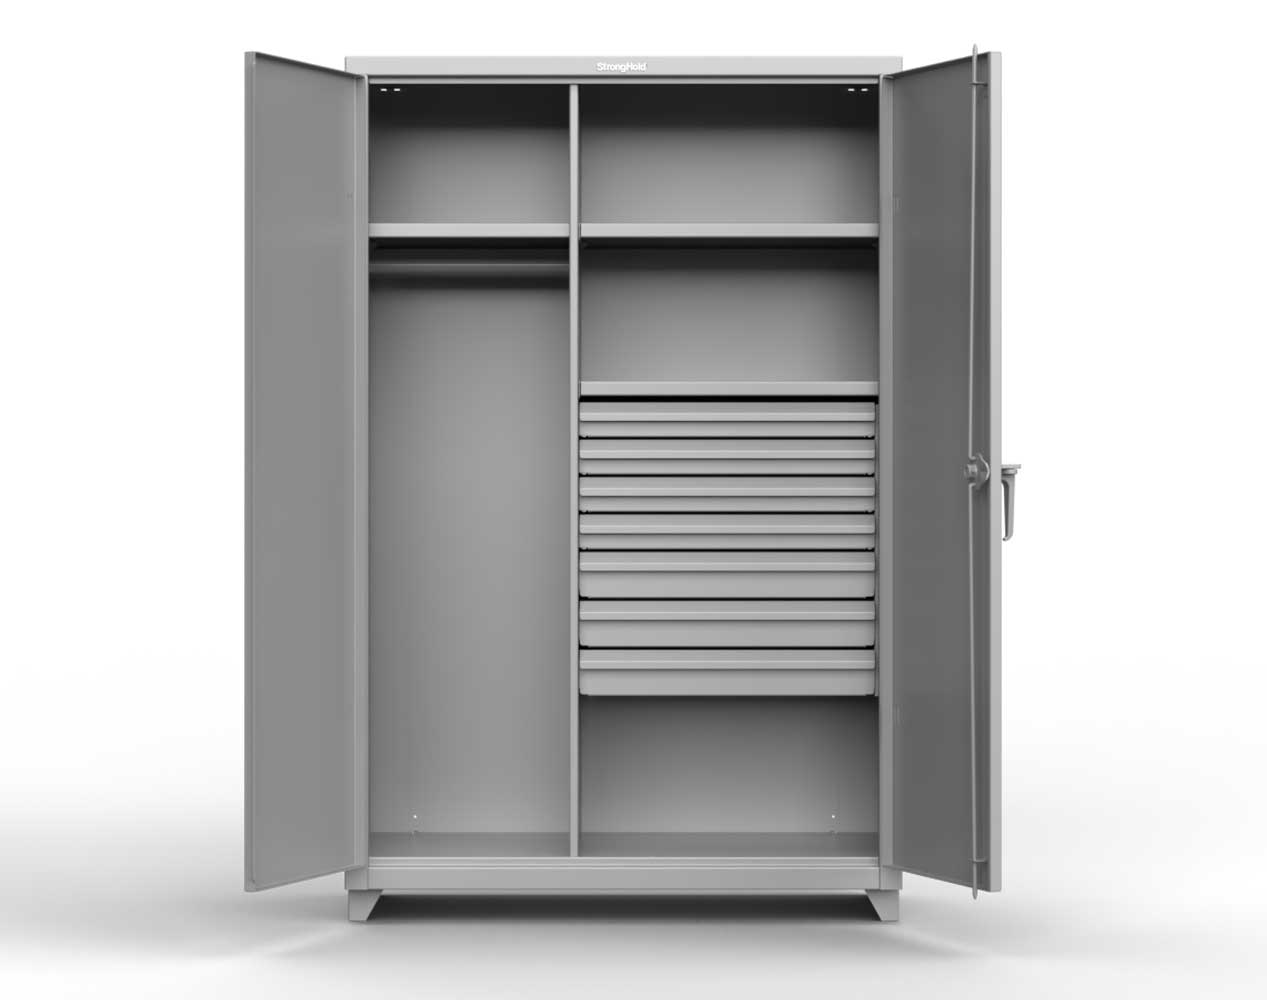 Extra Heavy Duty 14 GA Uniform Cabinet with 7 Drawers, 3 Shelves - 60 In. W x 24 In. D x 75 In. H